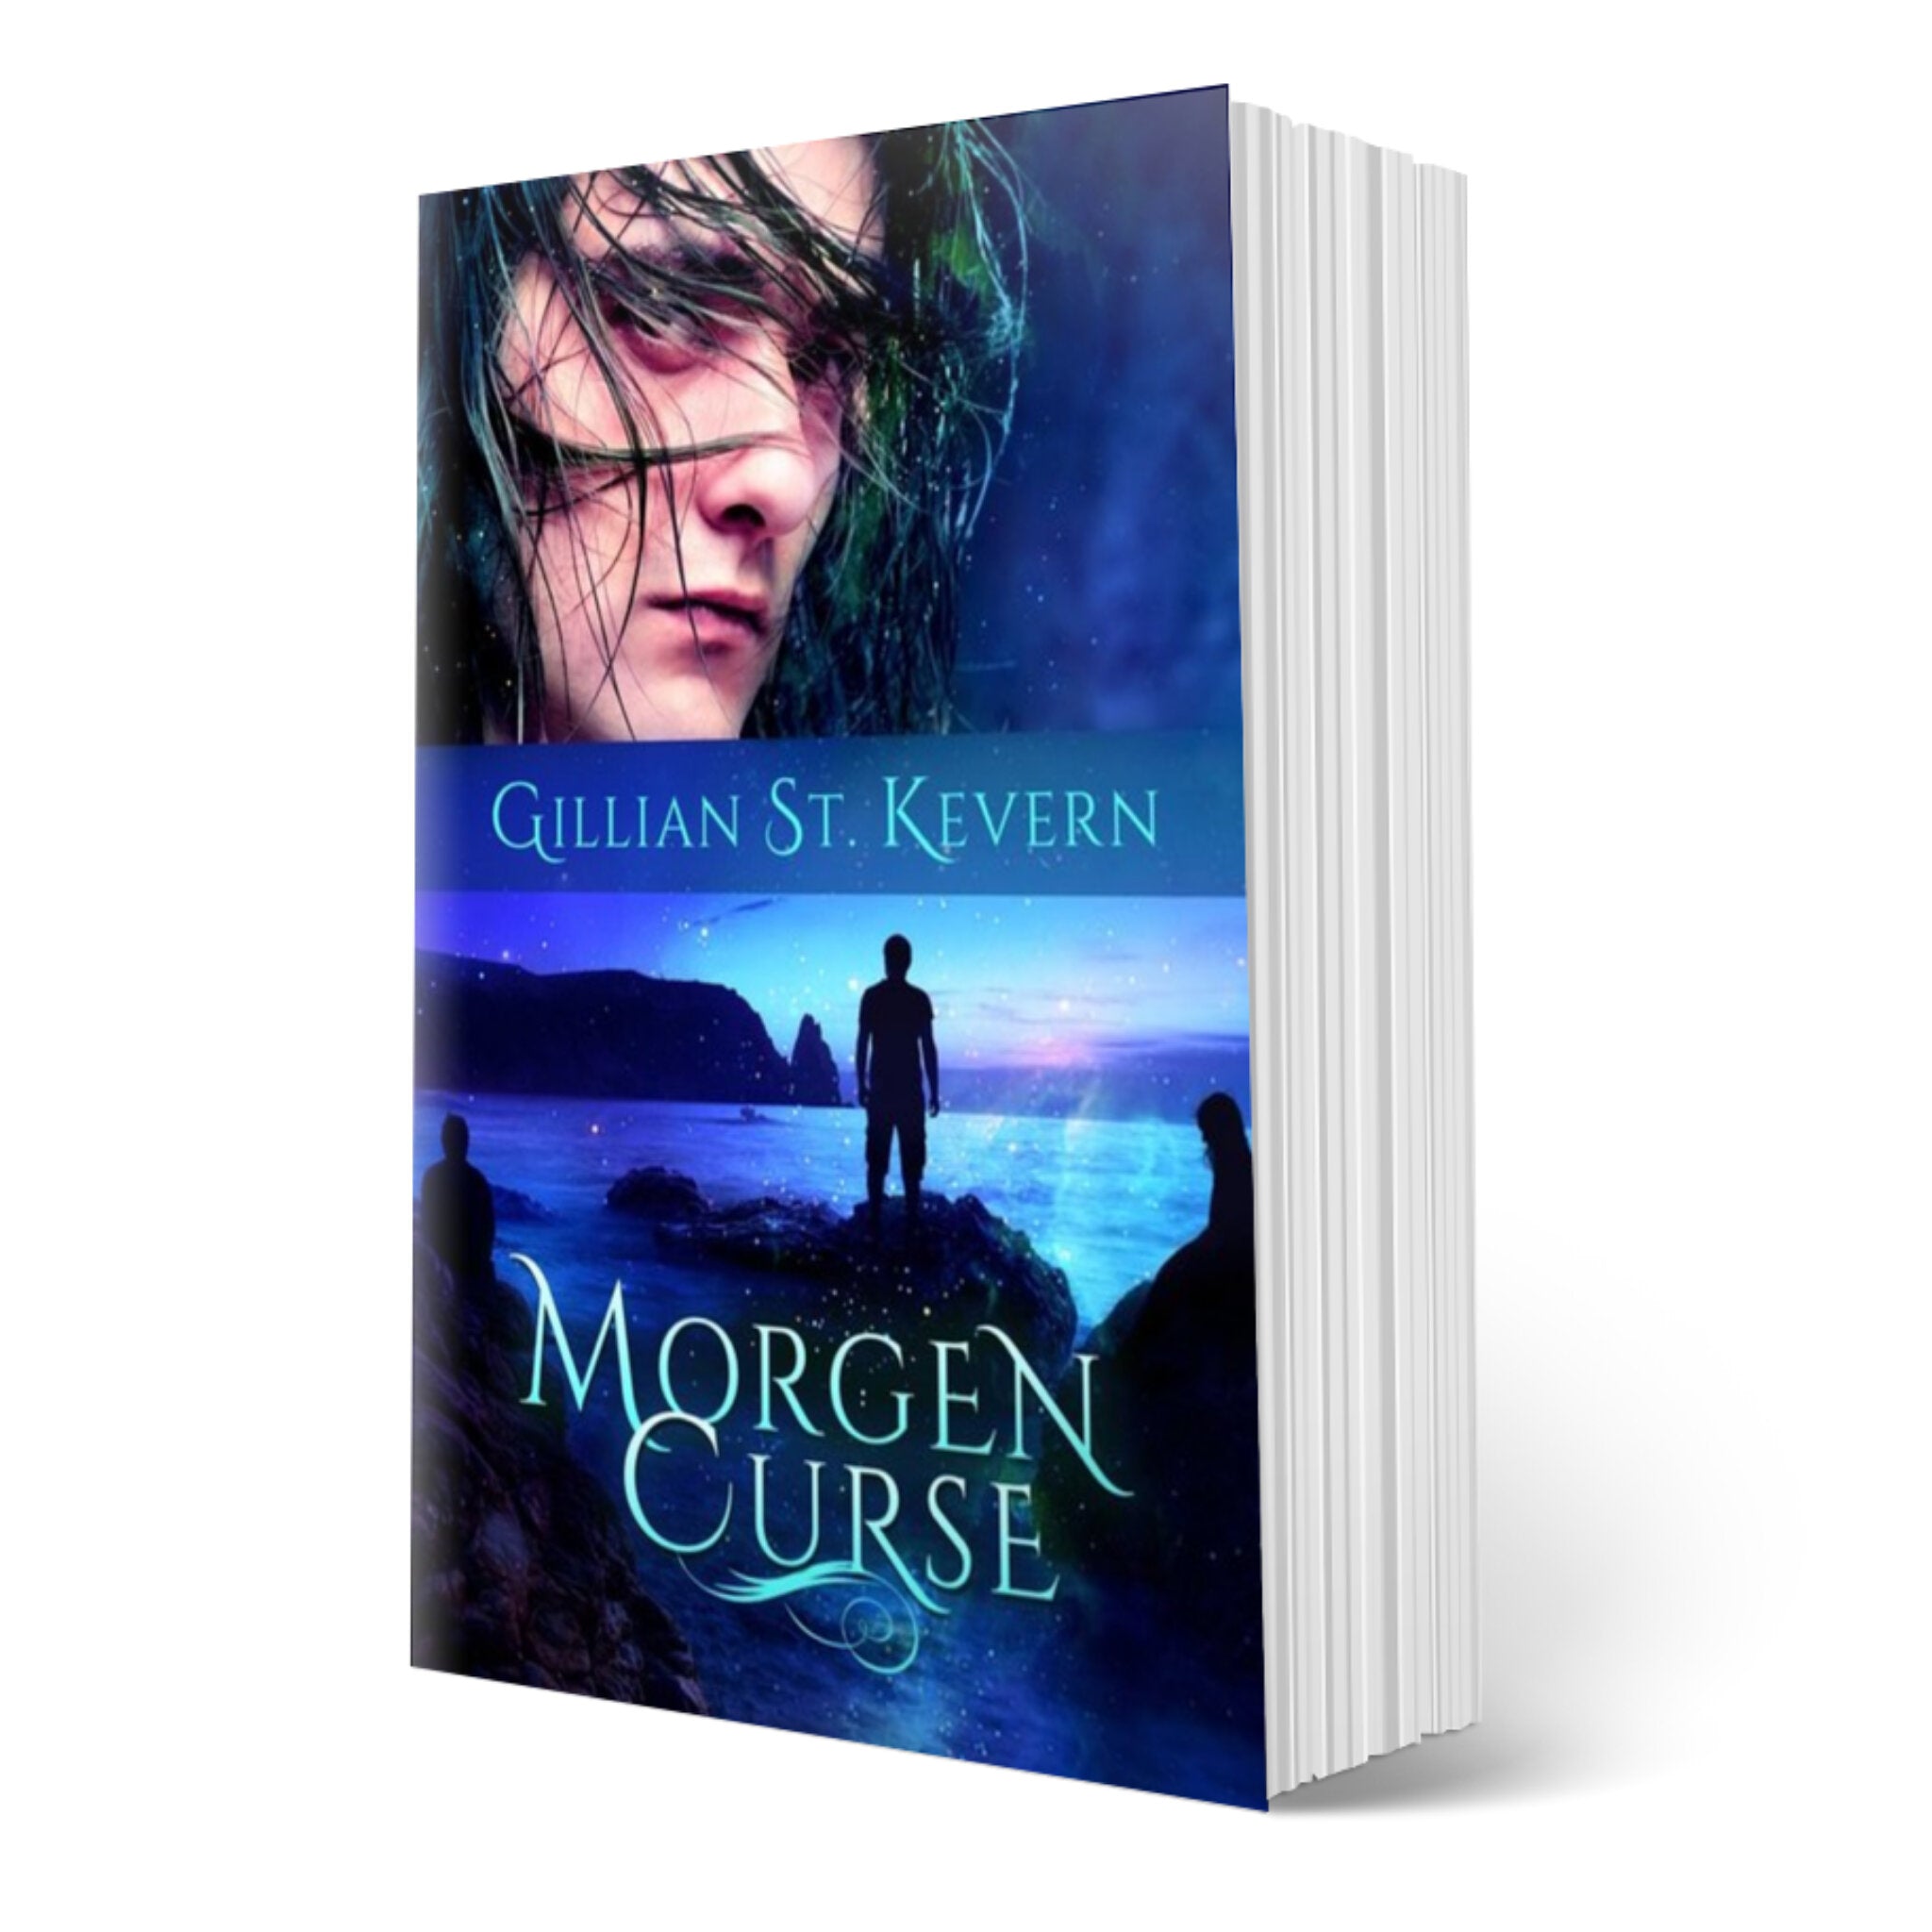 Morgen Curse, a gay mythological fantasy, cover: The cover is in two halves. In the top half, a young dark haired man (Ieuan), looks up warily from behind a curtain of hair. On the bottom half we see three figures silhouetted against the Pacific ocean. One stands, two are sitting.